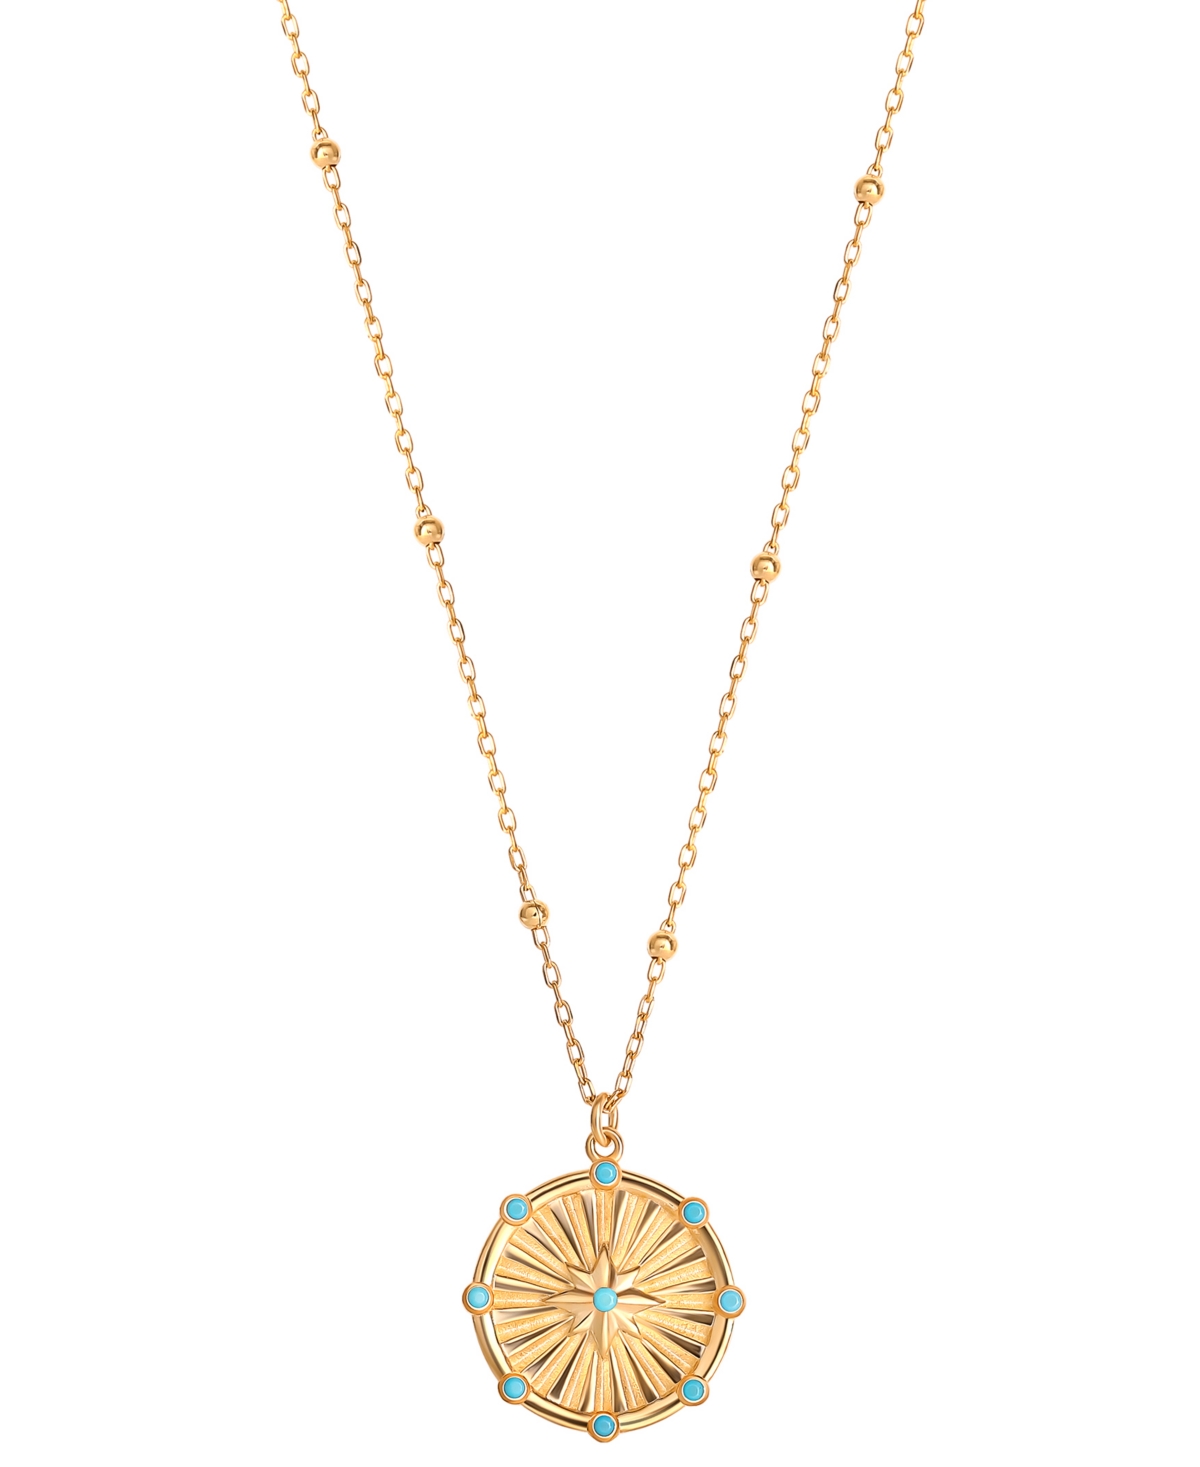 Giani Bernini Blue Cubic Zirconia Starburst Pendant Necklace In 18k Gold-plated Sterling Silver, 16" + 2" Extender